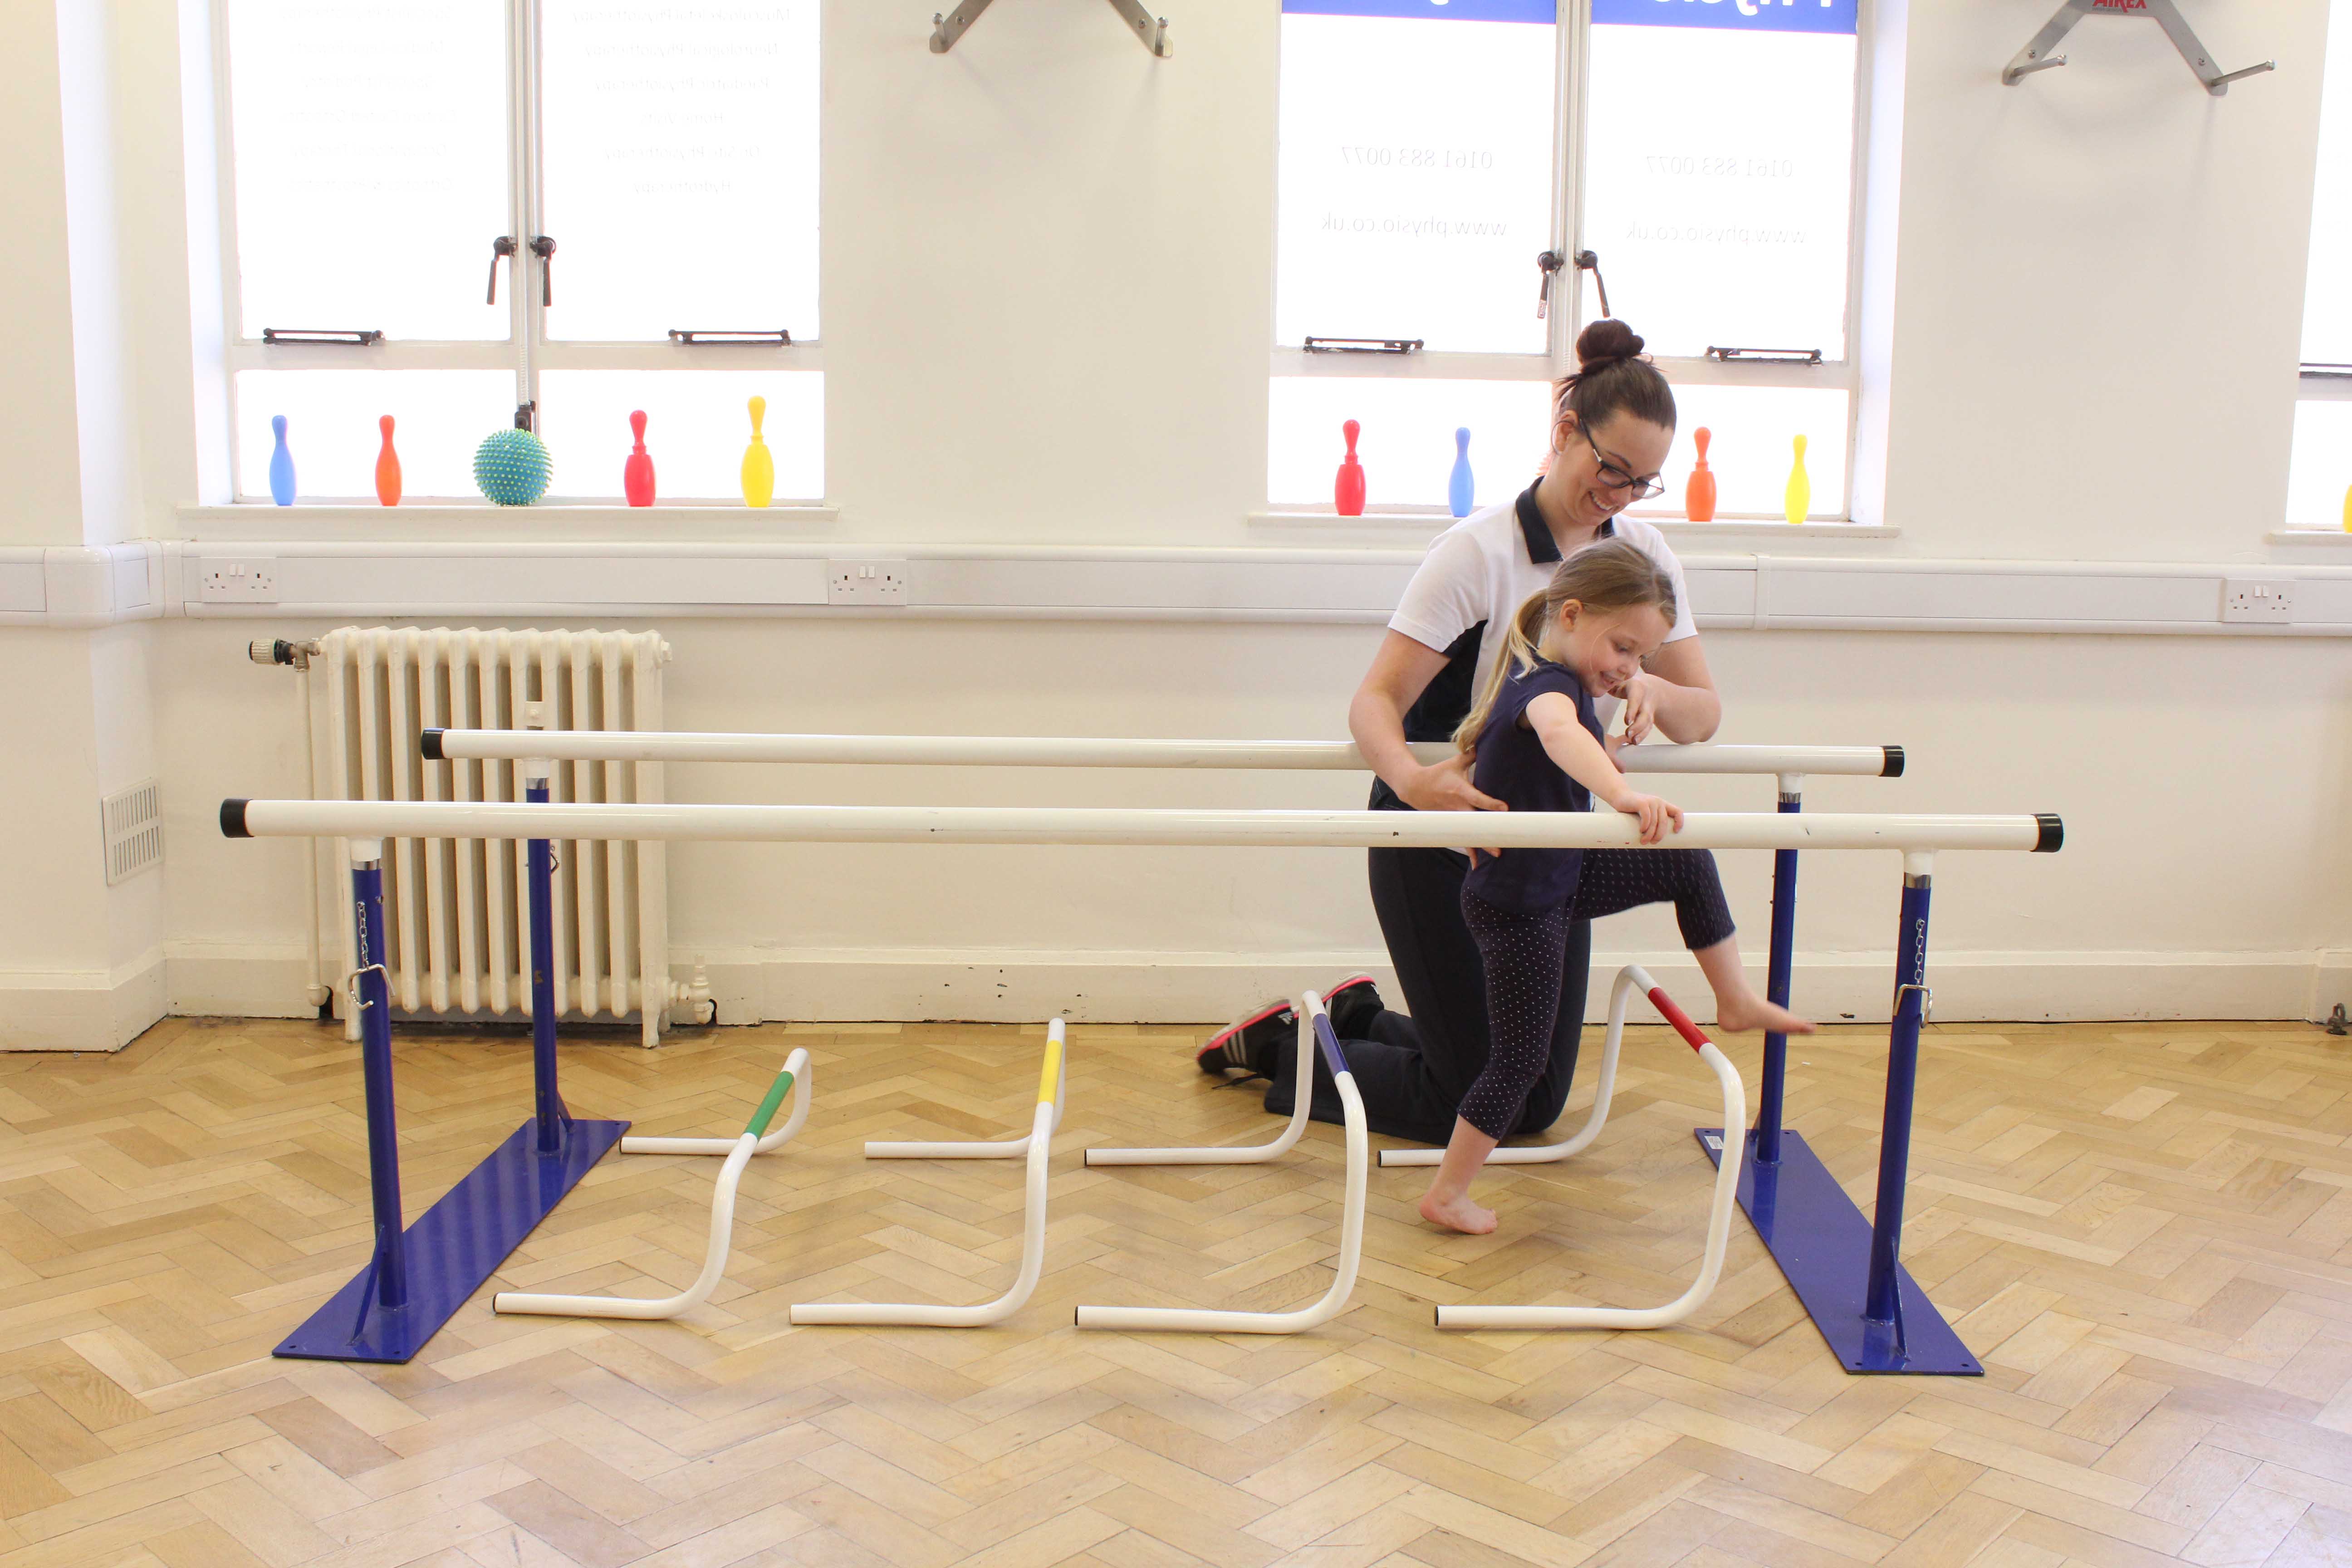 Gait re-education and mobility exercises between parallel bars, under supervision from a neurological physiotherapist